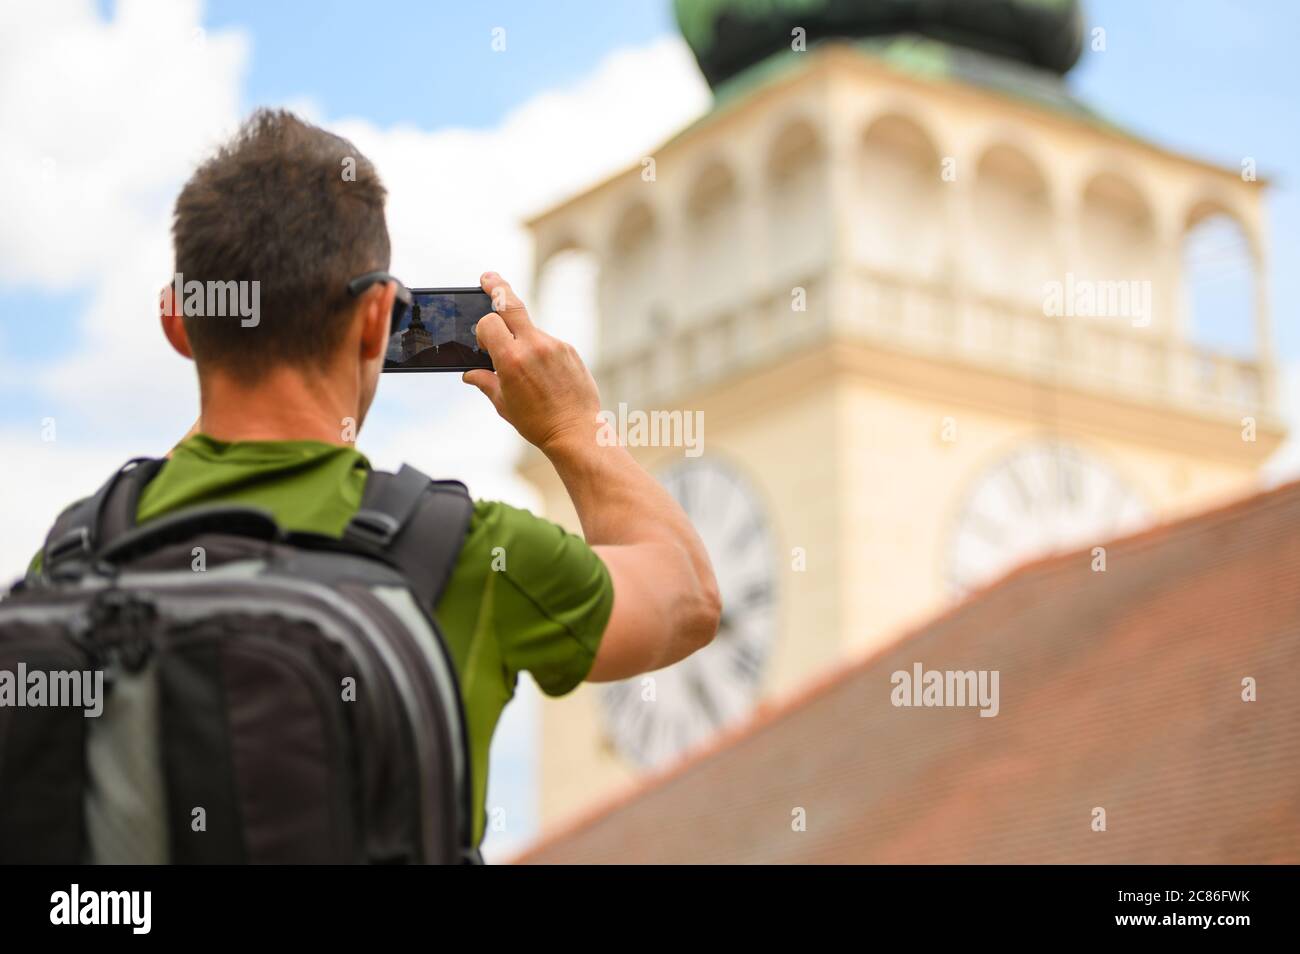 Caucasian Tourist with Large Backpack Taking Travel Pictures Using His Smartphone Device. Stock Photo